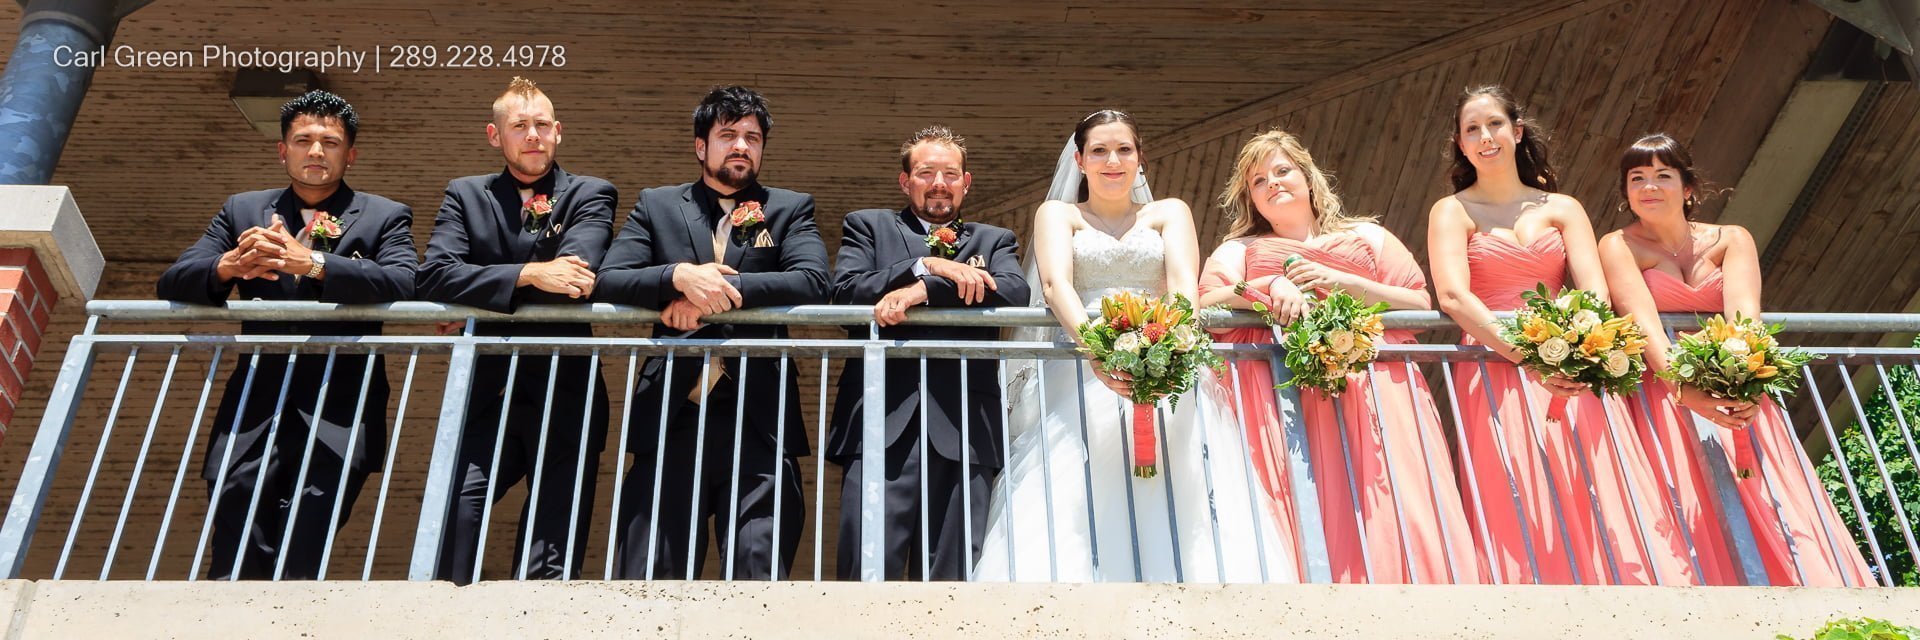 Wedding party on balcony looking at photographer